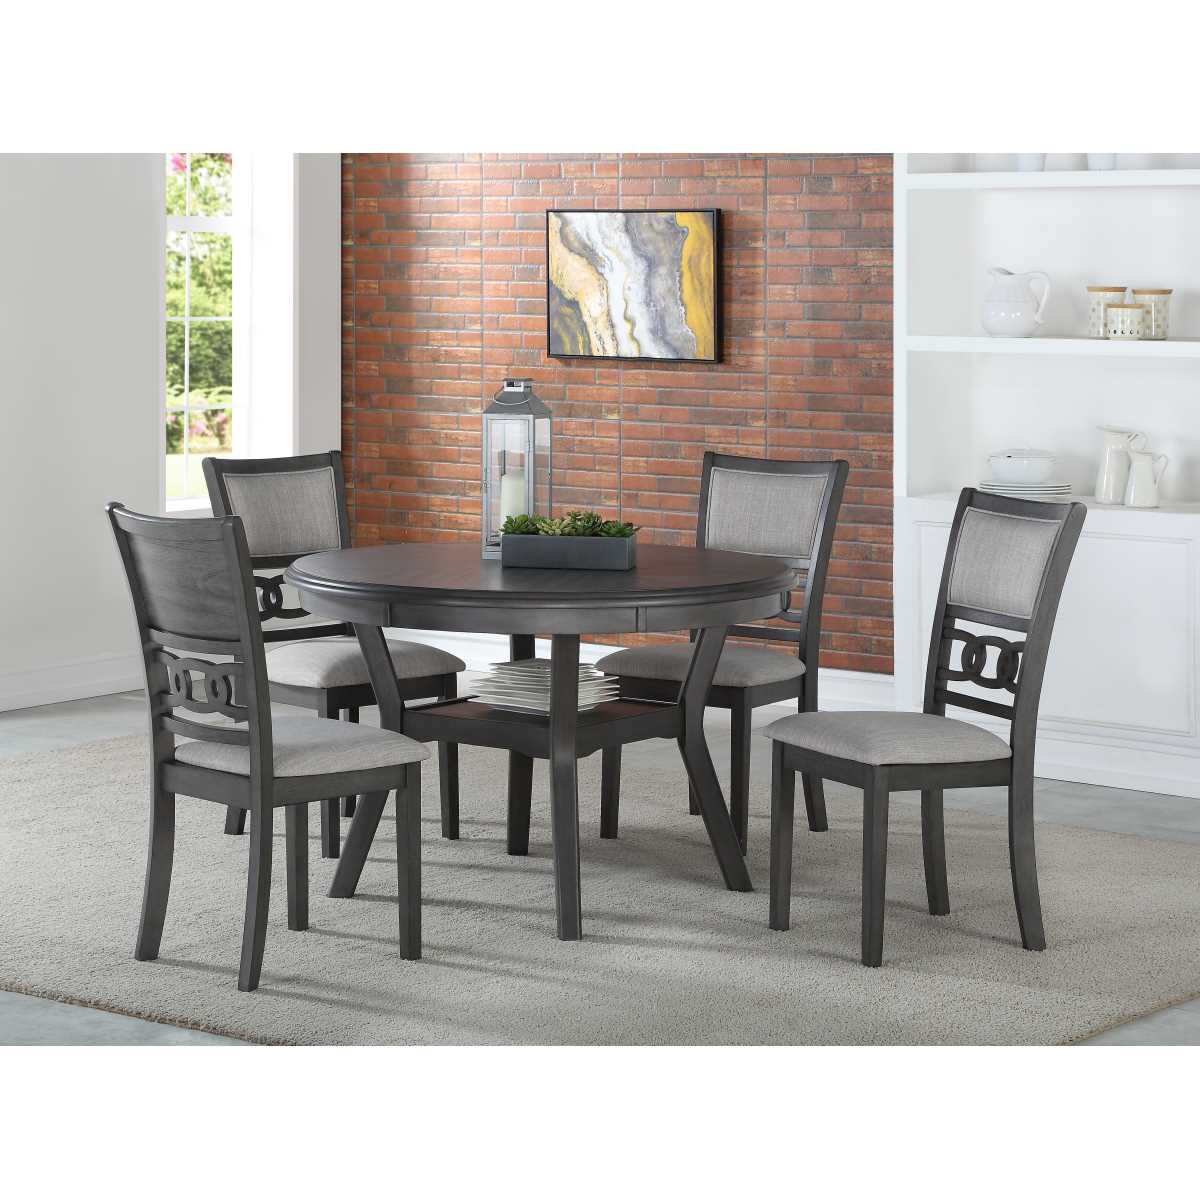 New Classic Furniture Gia Round Dining Table & 4 Chairs